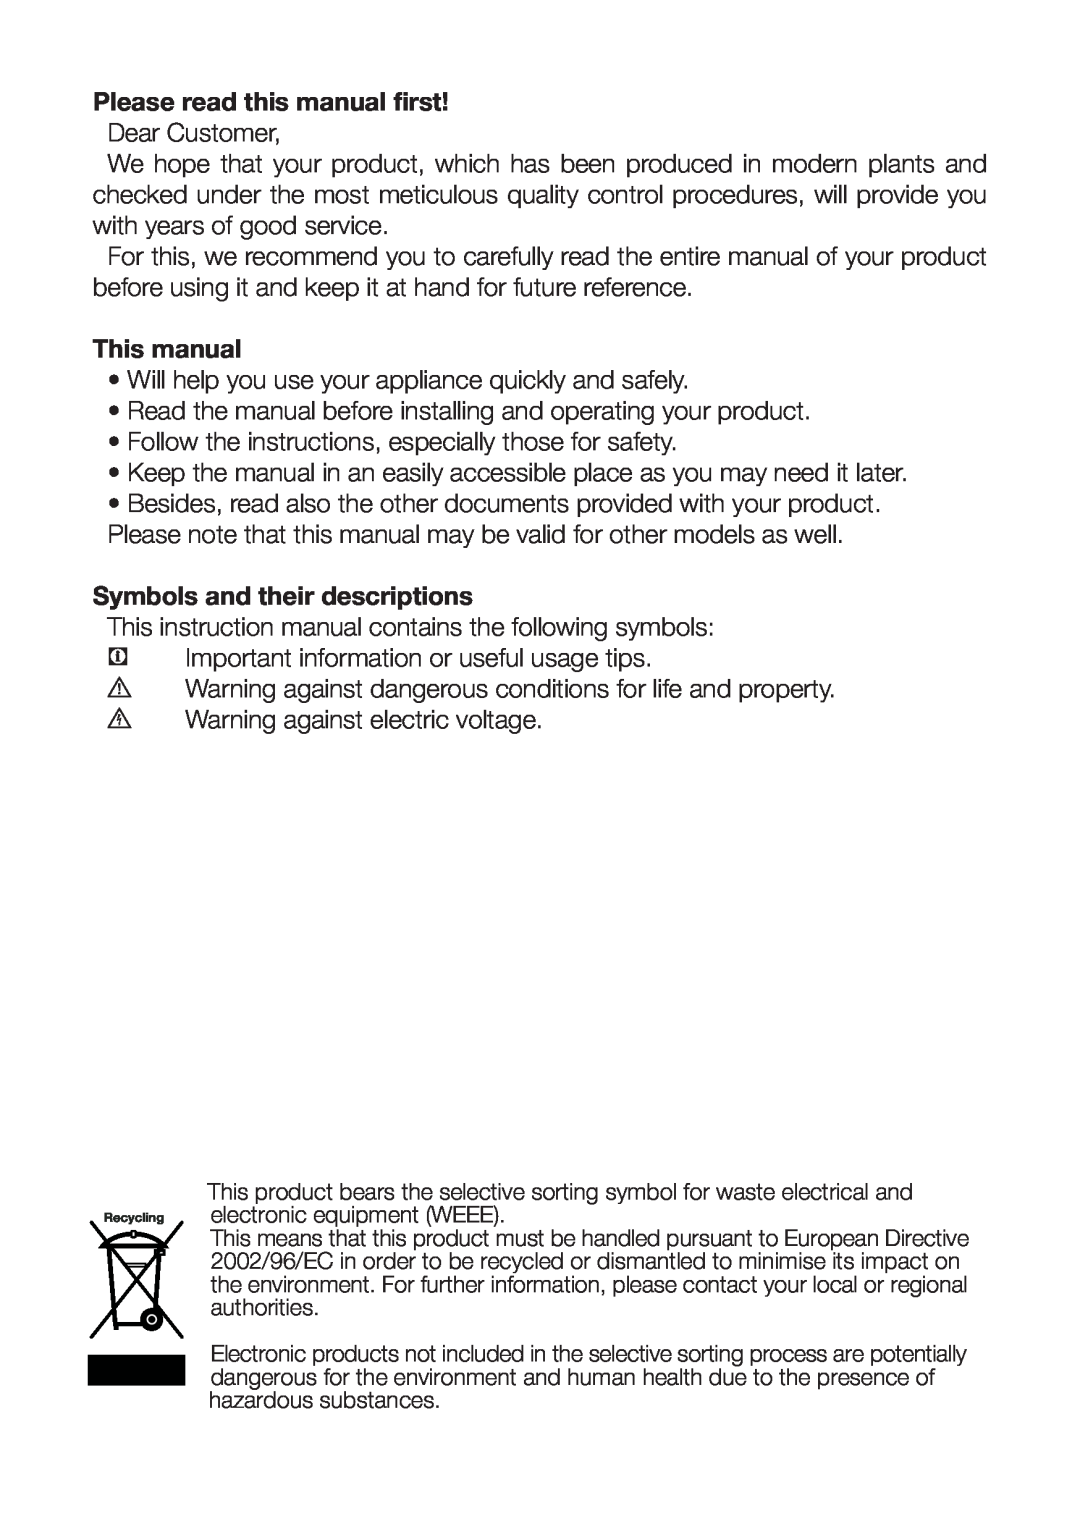 Beko CF7914 Please read this manual first, This manual, Symbols and their descriptions 